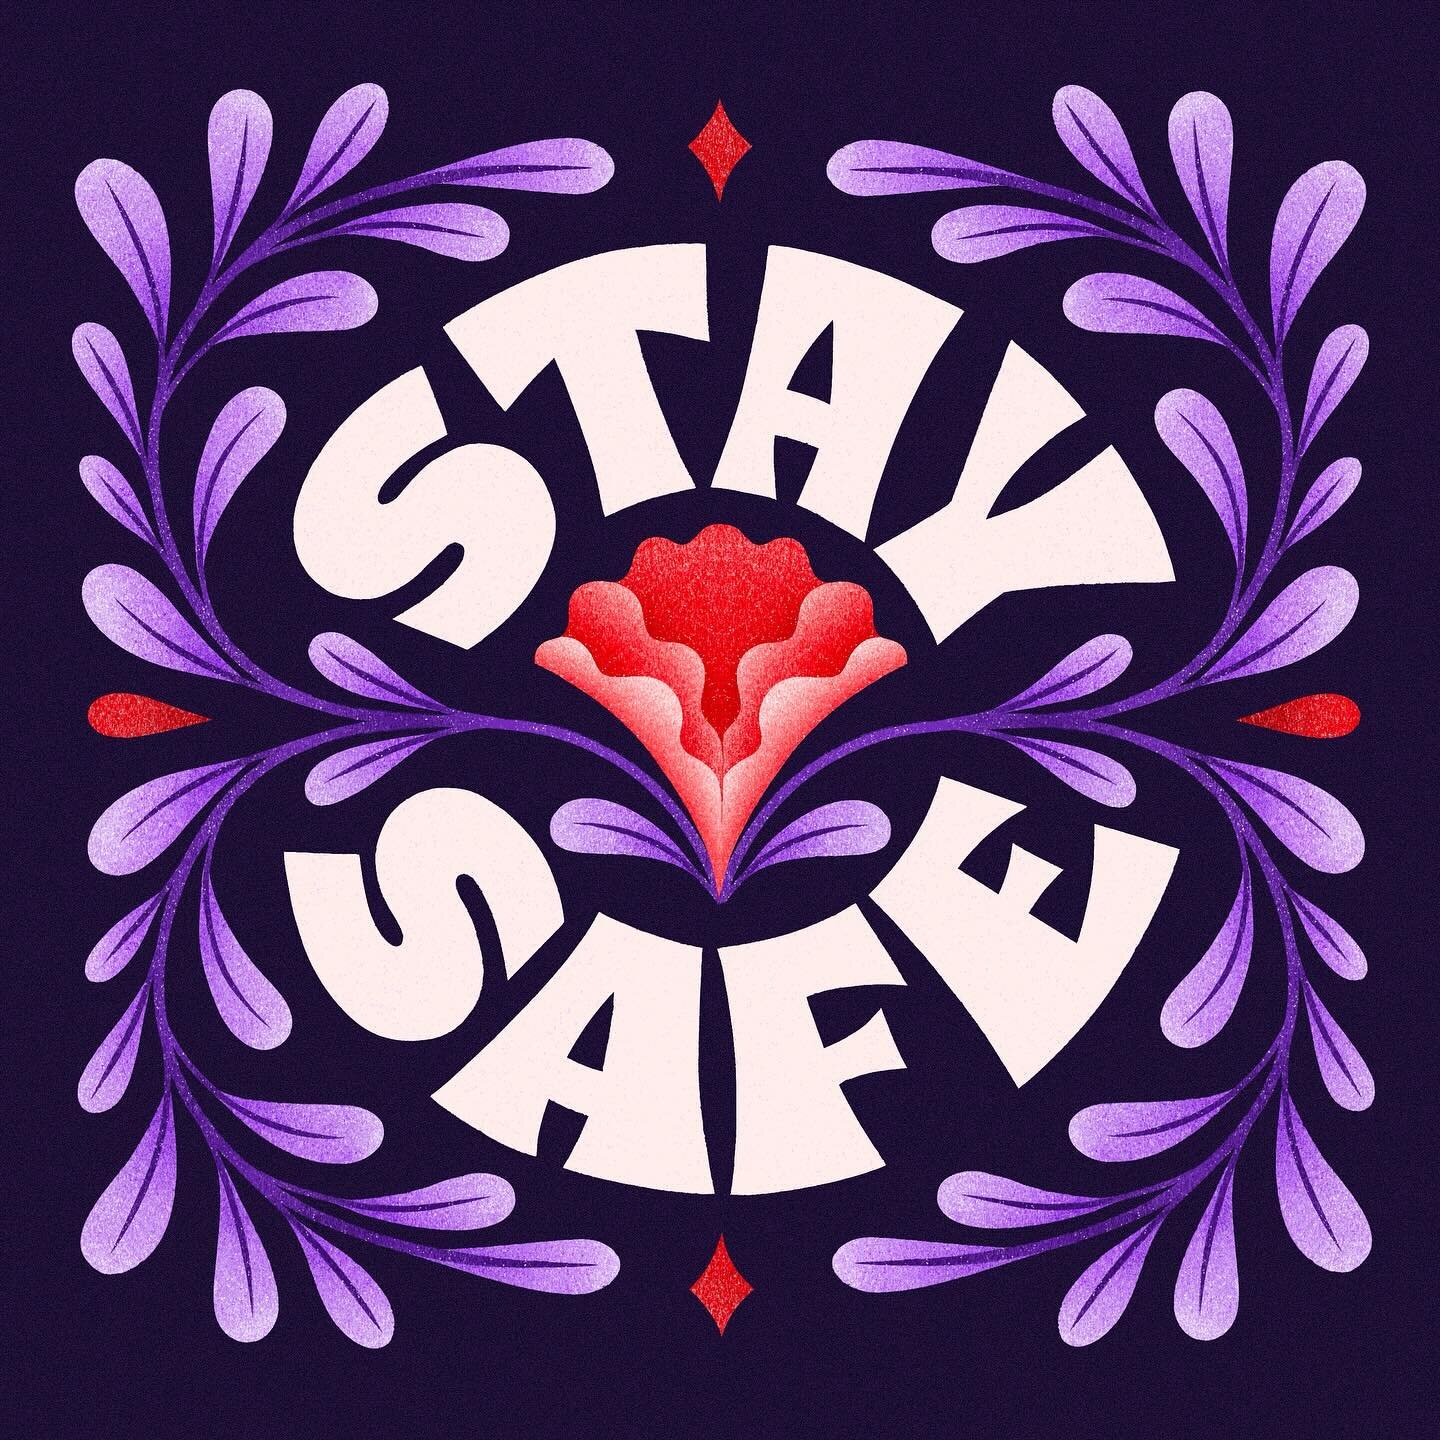 Stay safe Friends 🌞
.
.
.
.
.
#illustration #handlettering #lettering #design #graphicdesign #type #typography #staysafe #drawing #procreate #adobe #femmetype #dailytype #friendsoftype #tdc #art #womenindesign #creative